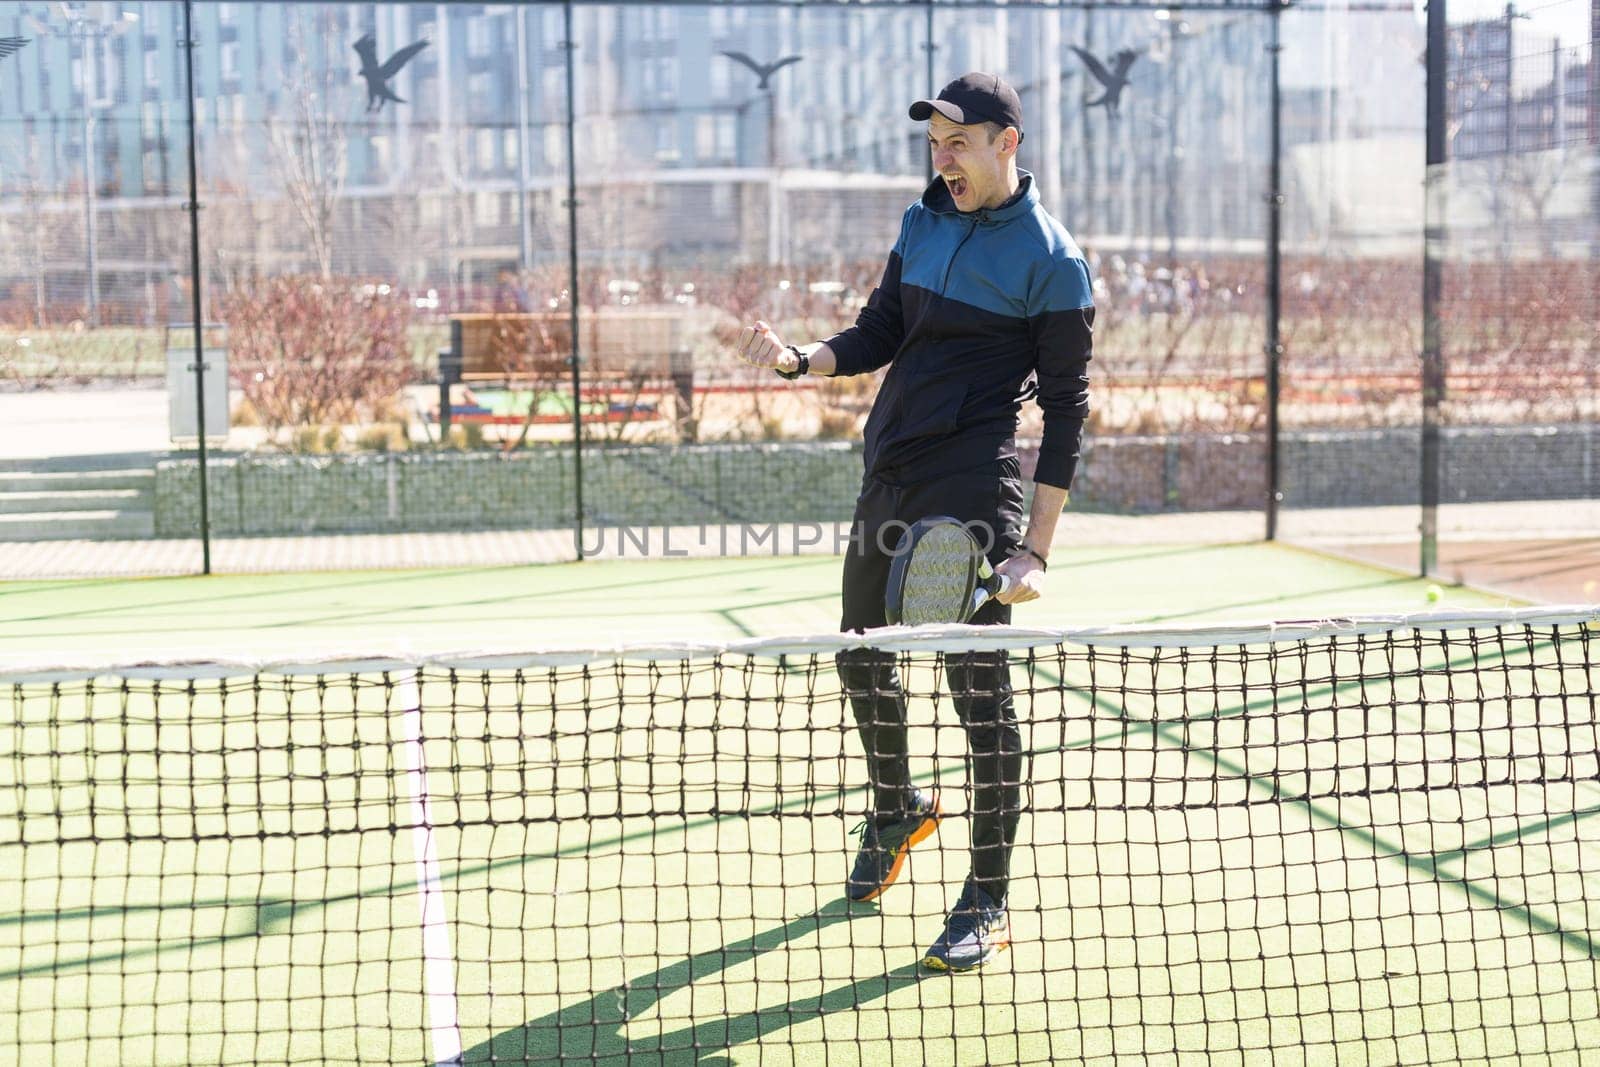 paddle tennis coach teaching on a residential paddle court, front view. High quality photo